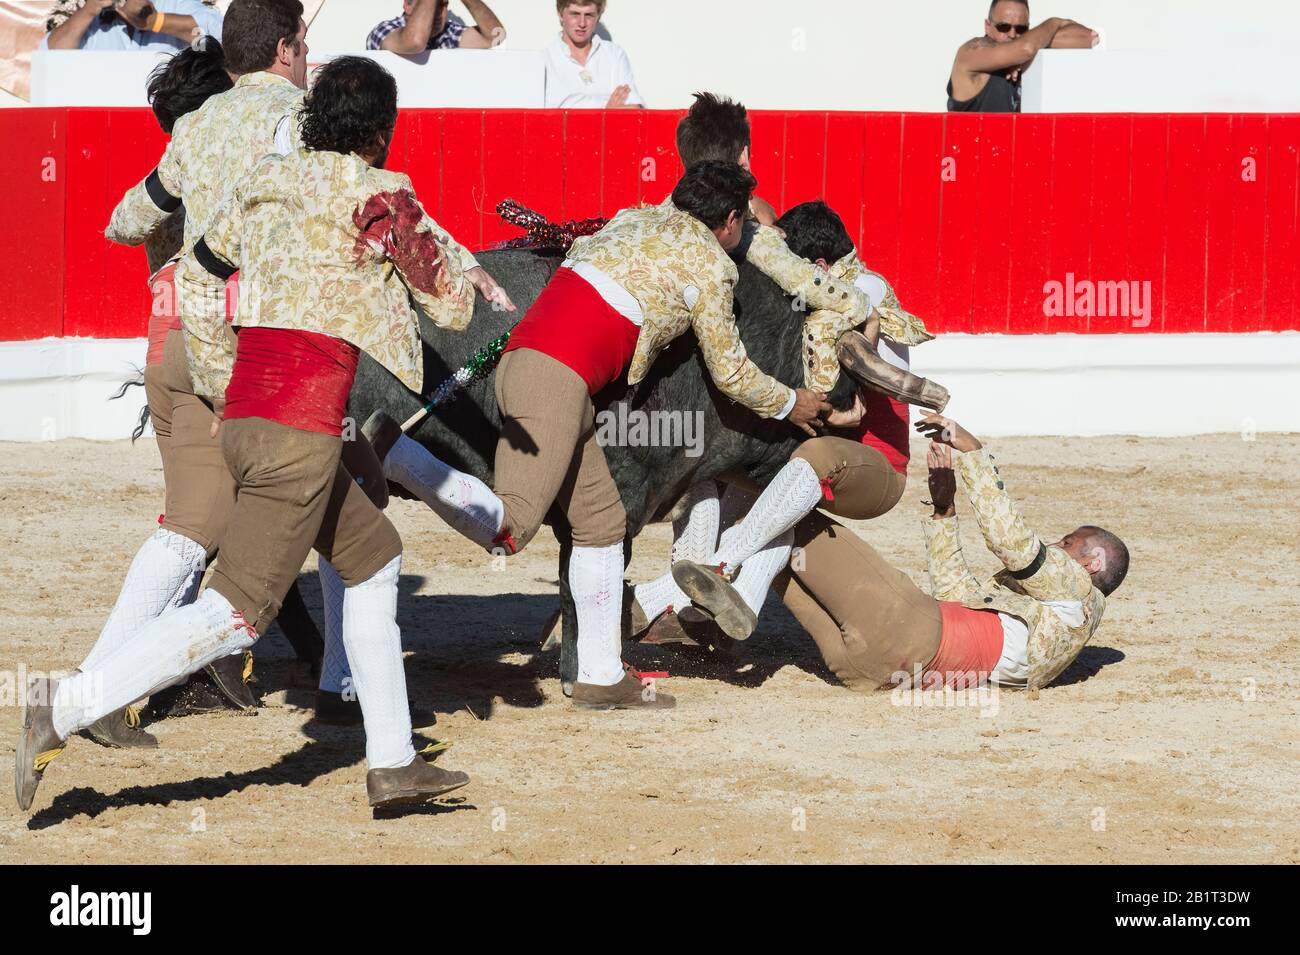 Bullfight in Alcochete. Forcado challenging a bull and trying to stop it, Bulls are not killed during the bullfight, Alcochete, Setubal Province, Port Stock Photo